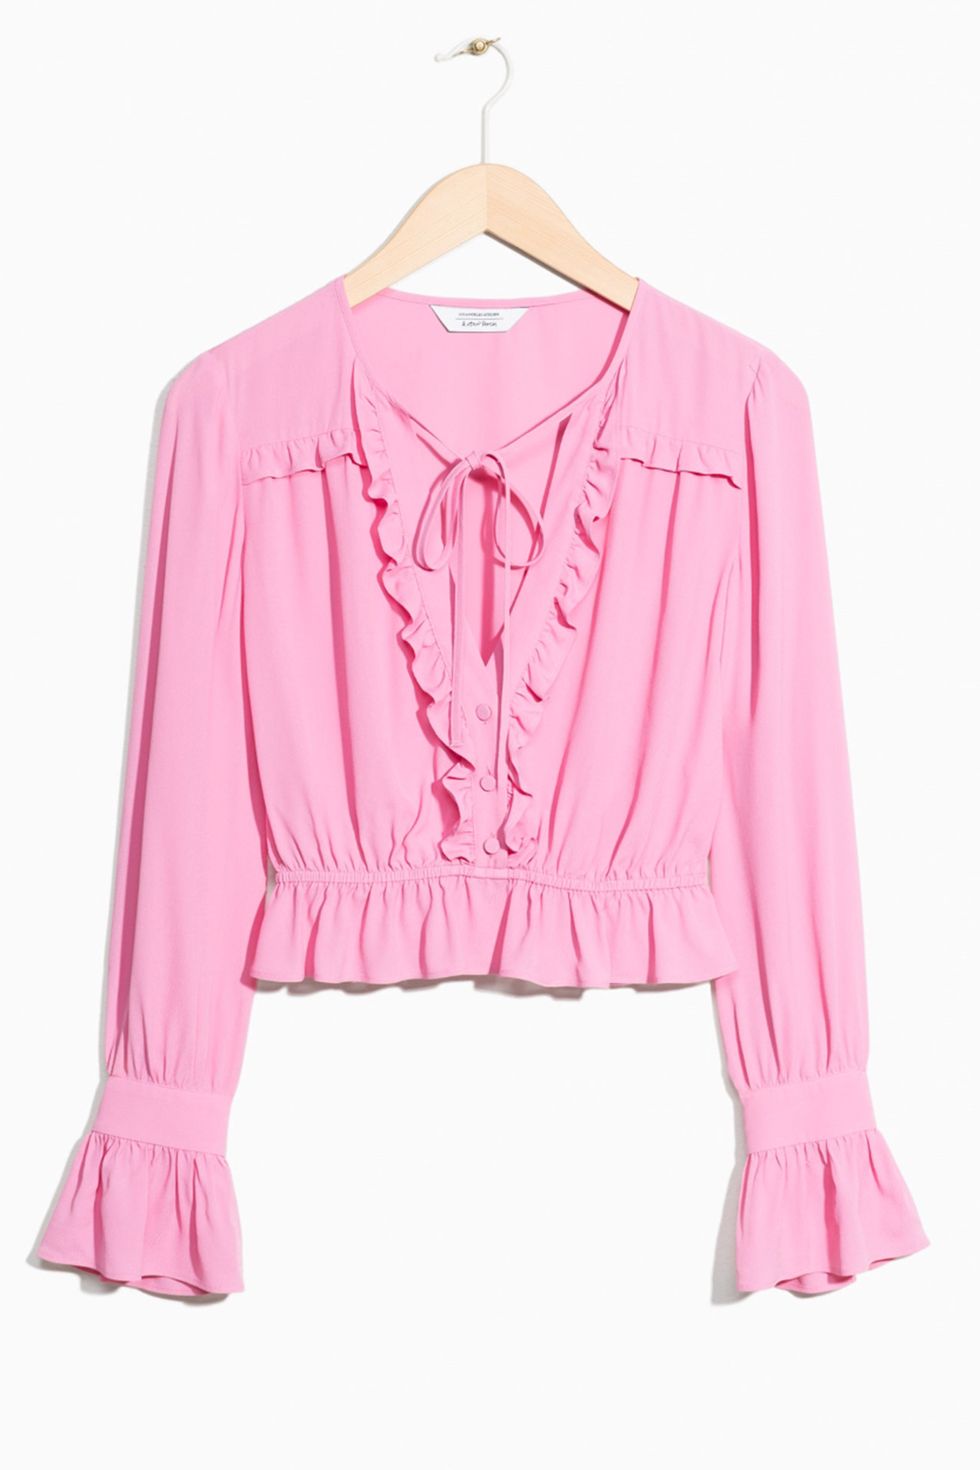 Clothing, Pink, Outerwear, Sleeve, Blouse, Collar, Top, Neck, Magenta, Shoulder, 